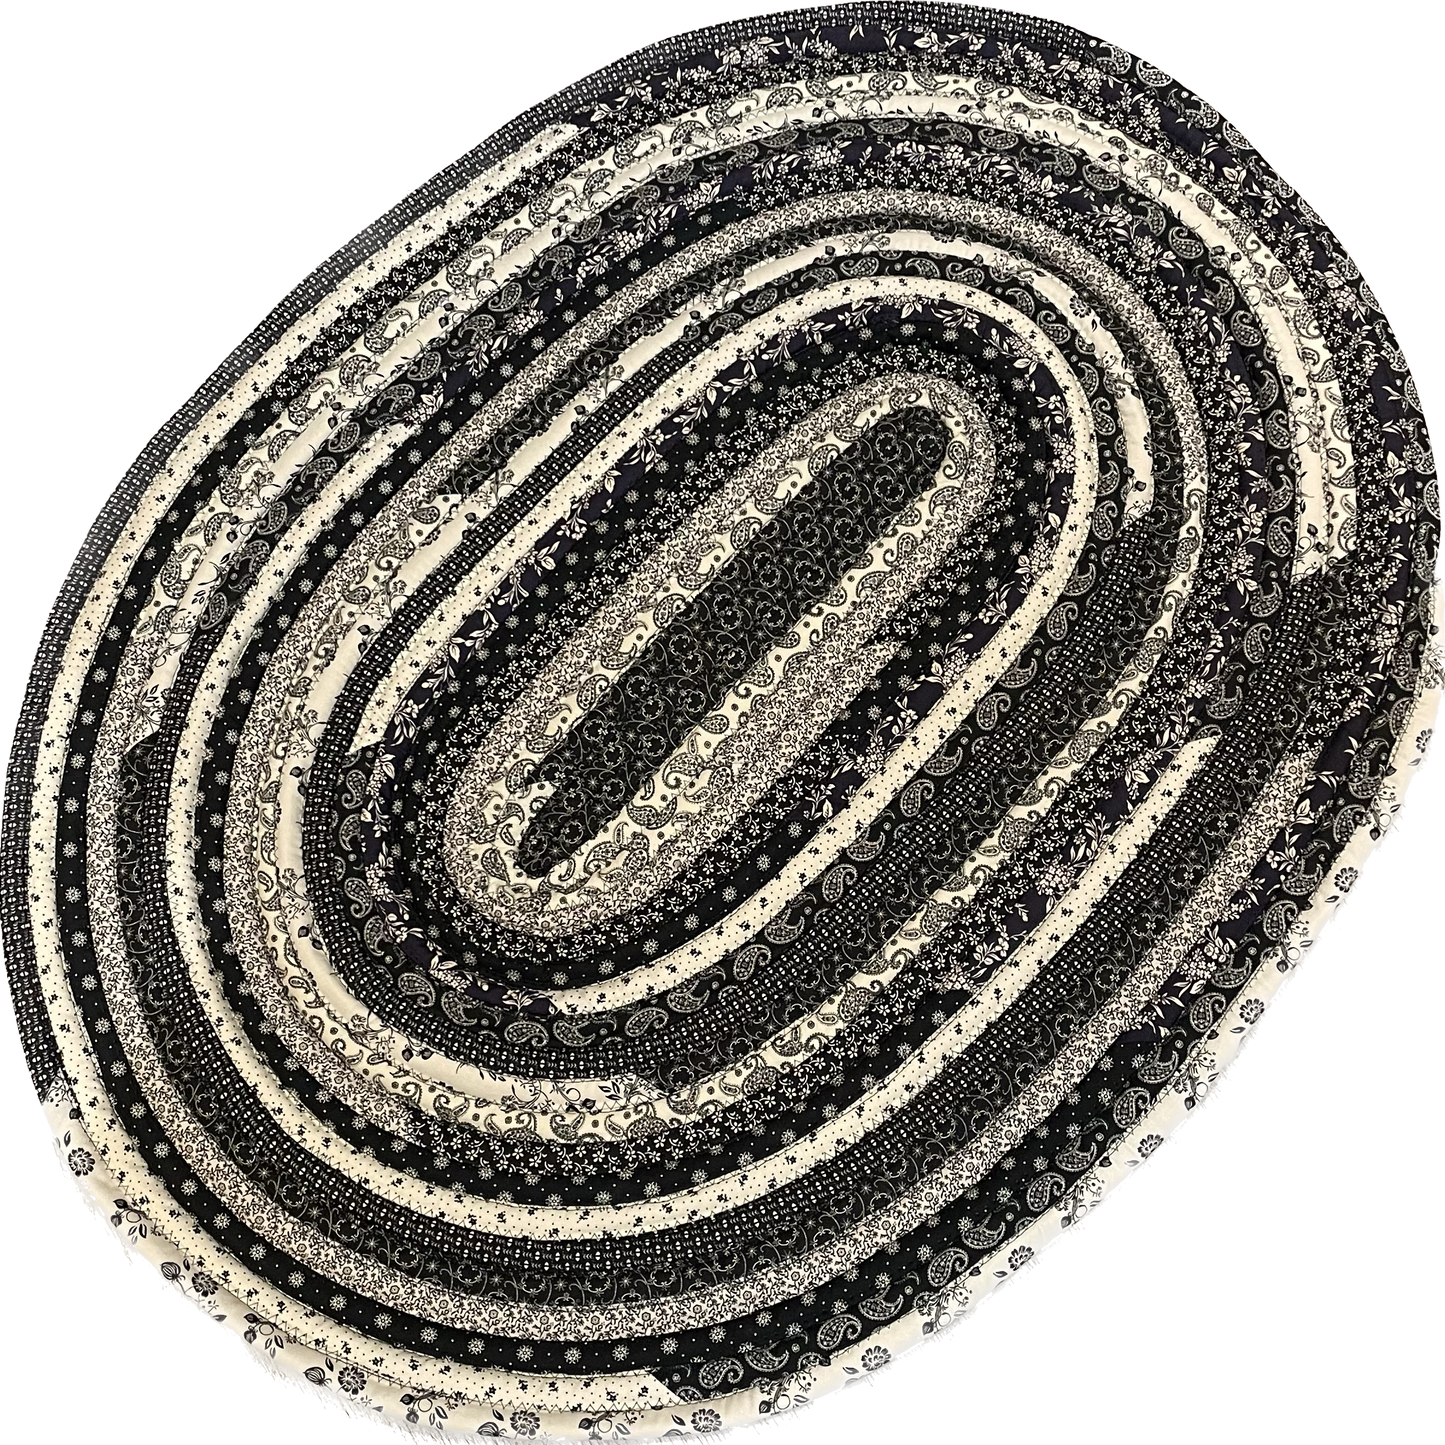 Black and Cream Jellyroll Rug for Kitchen